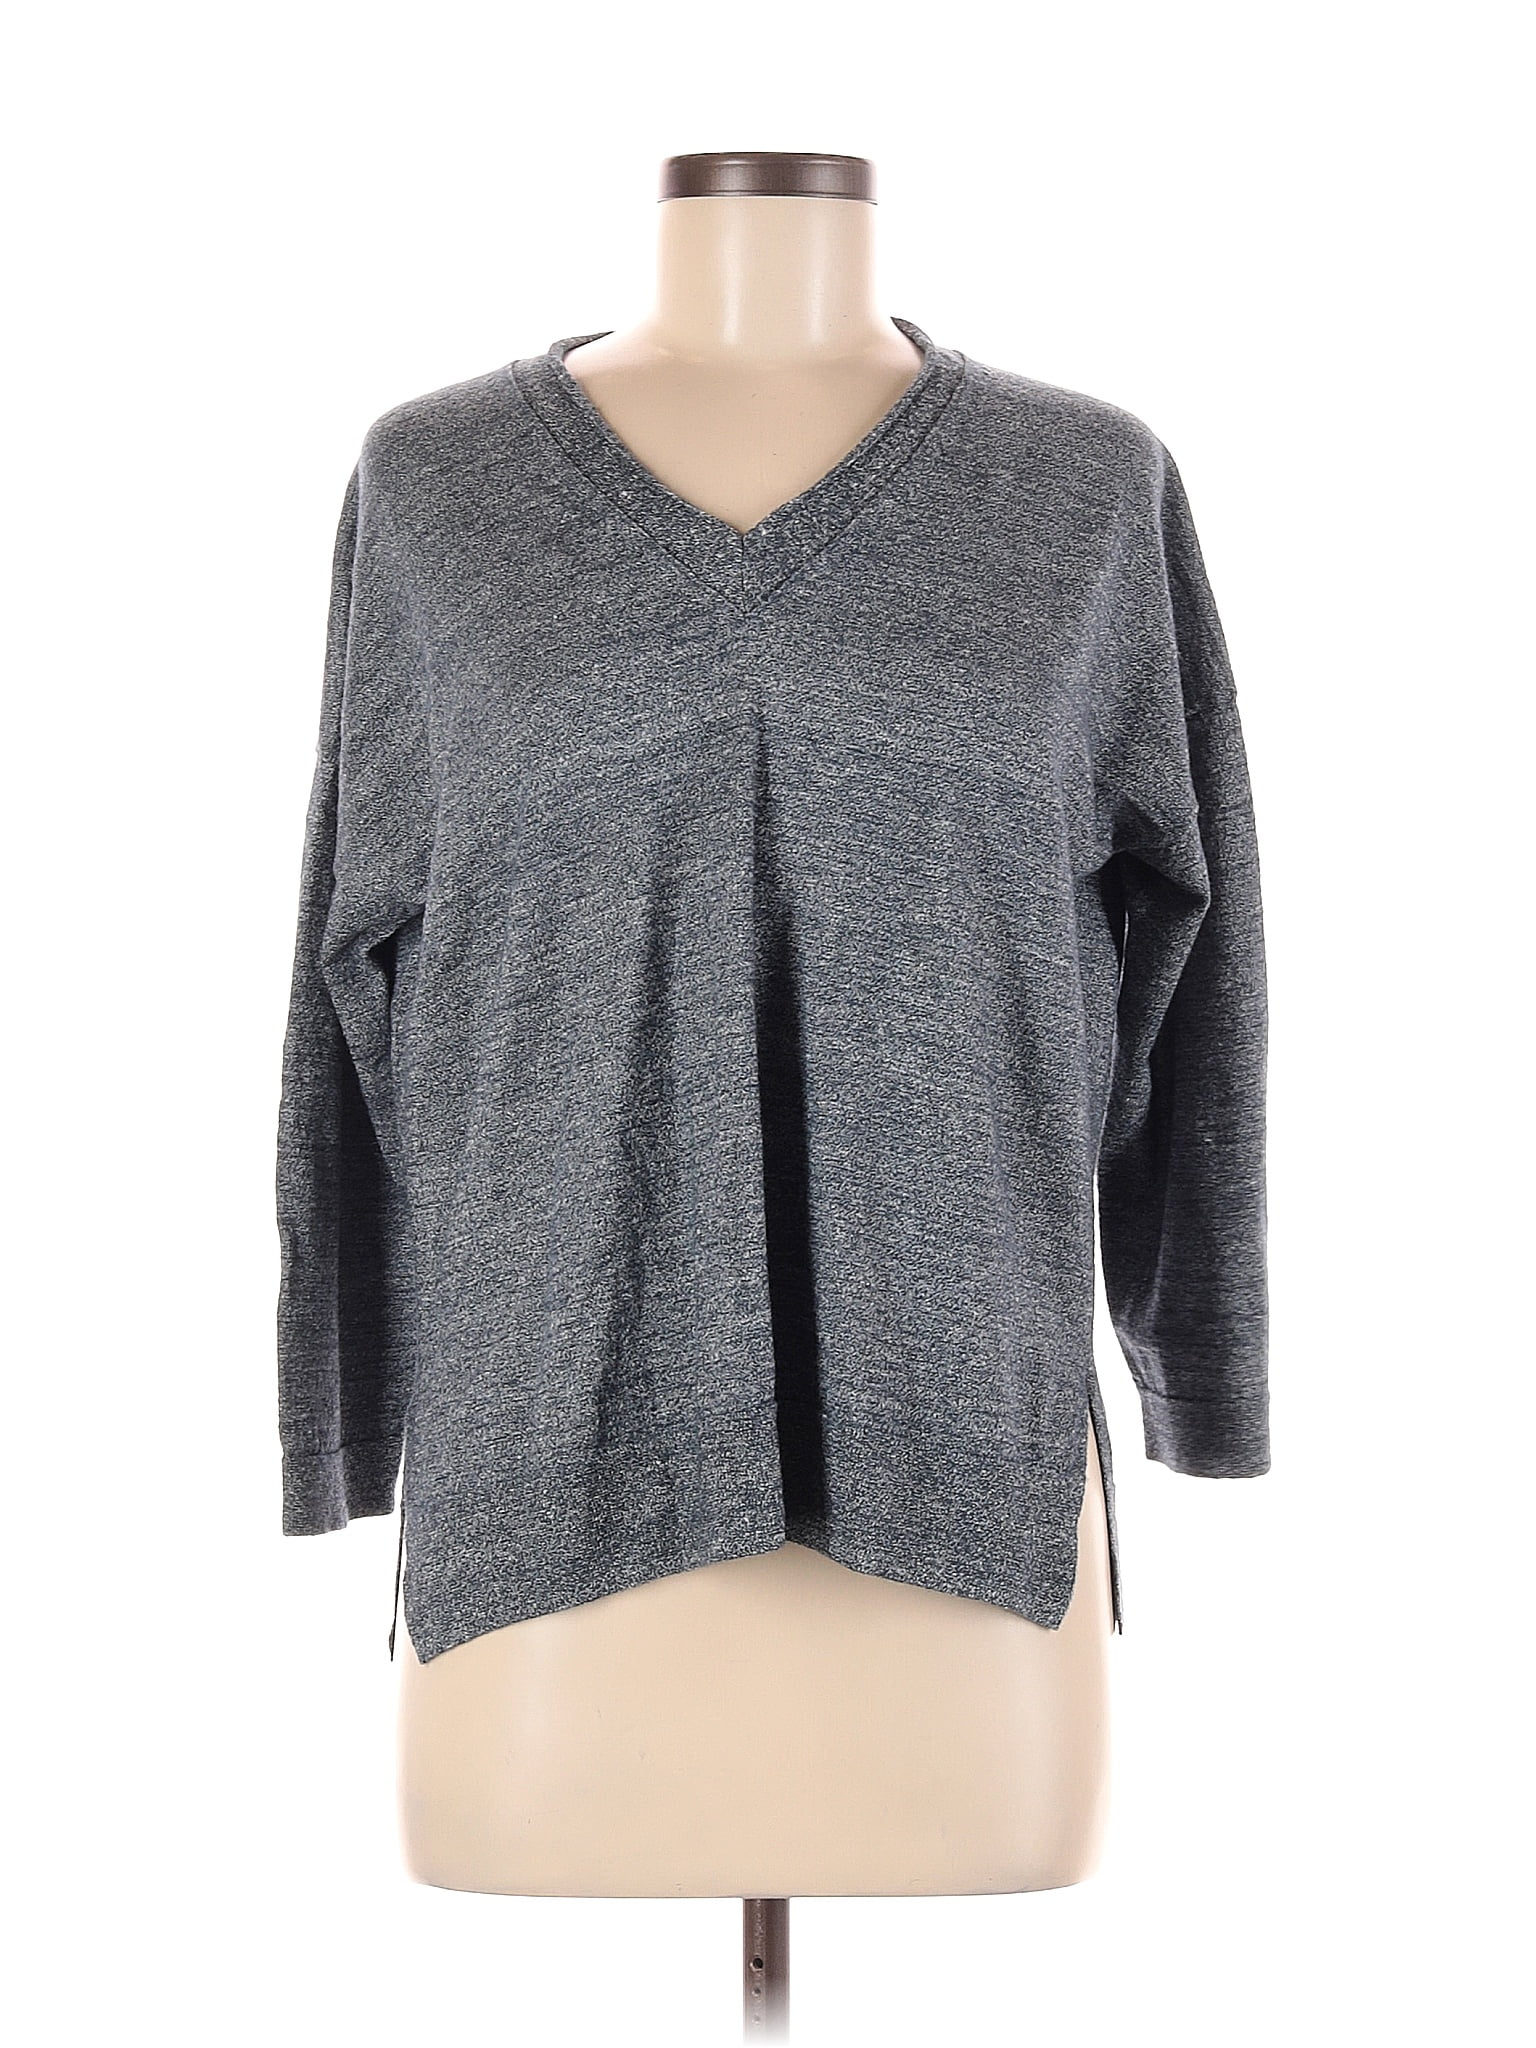 J.Crew Marled Solid Blue Gray Long Sleeve Top Size M - 71% off | ThredUp